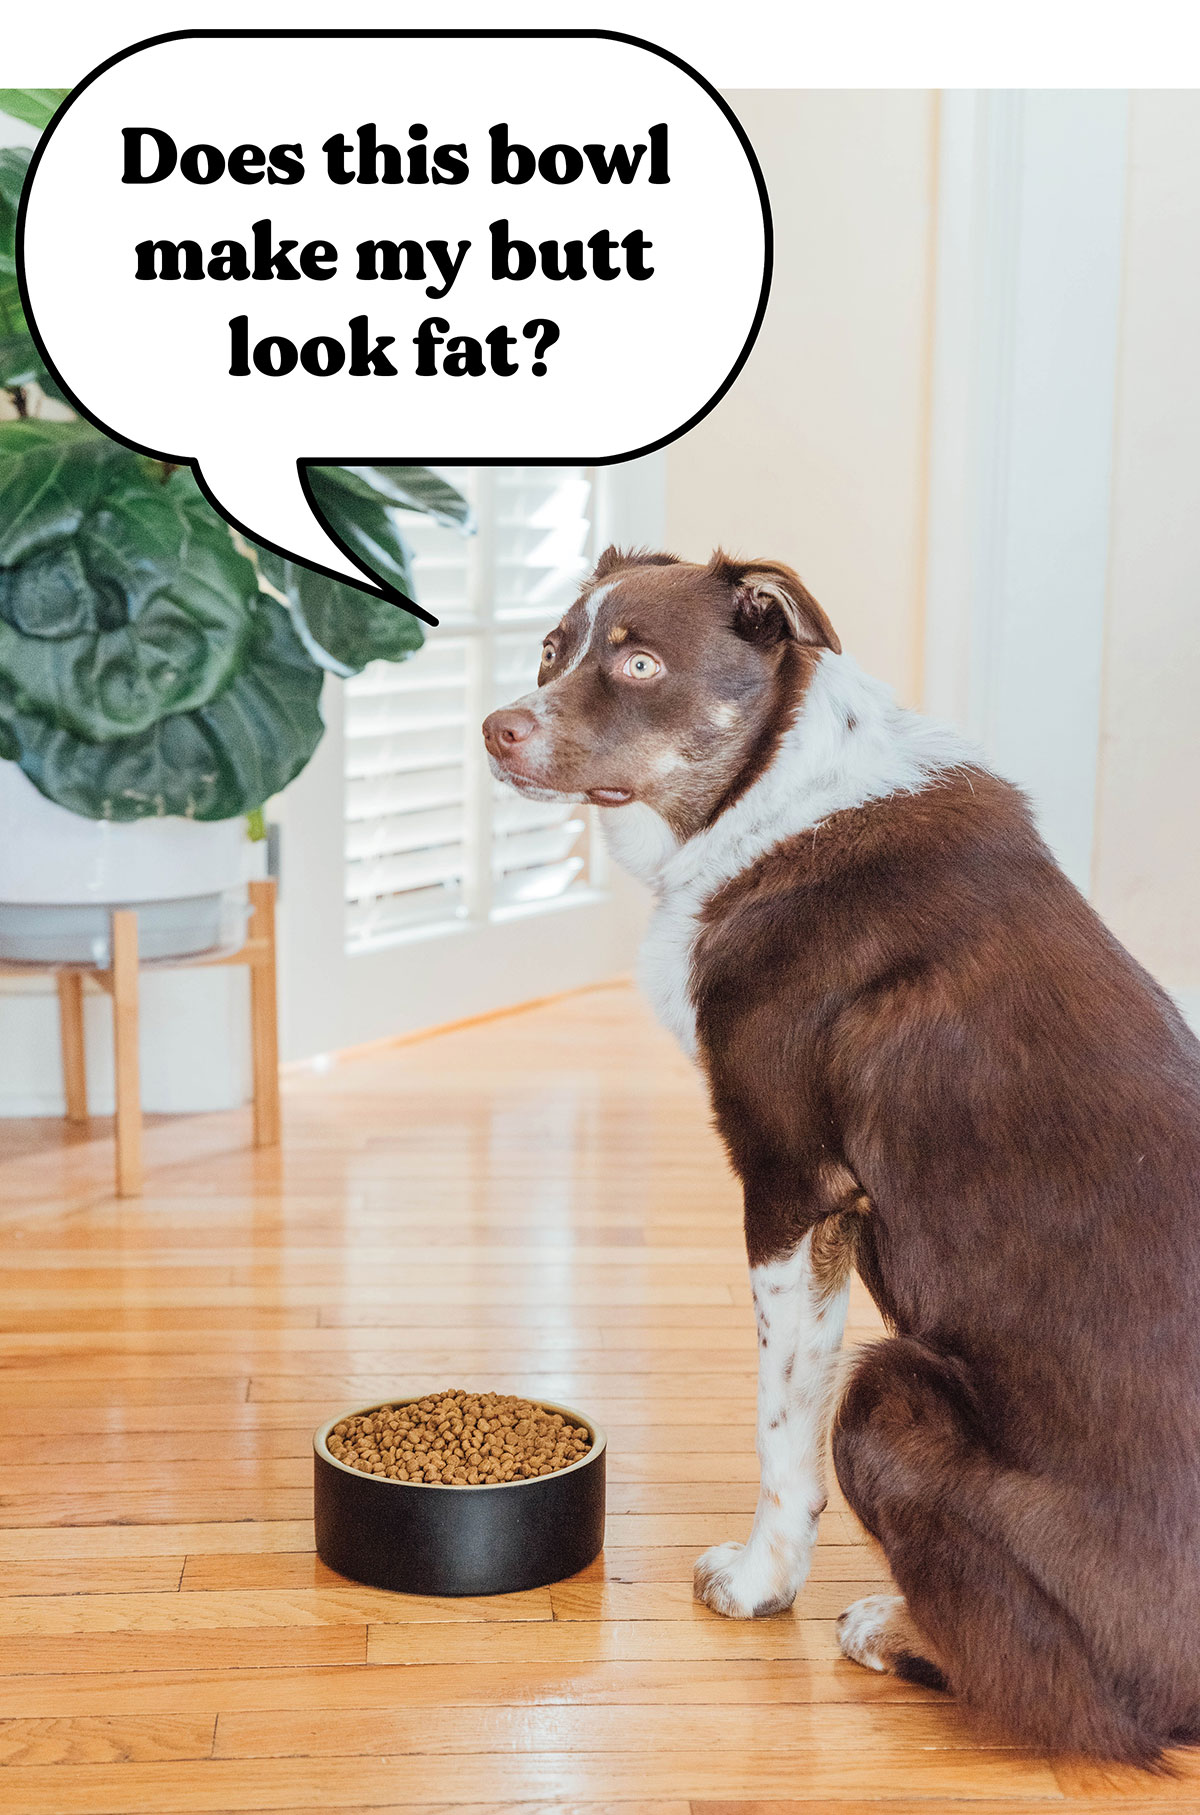 Dog standing next to a bowl of kibble food with a thought bubble that says, "does this bowl make my butt look fat?"